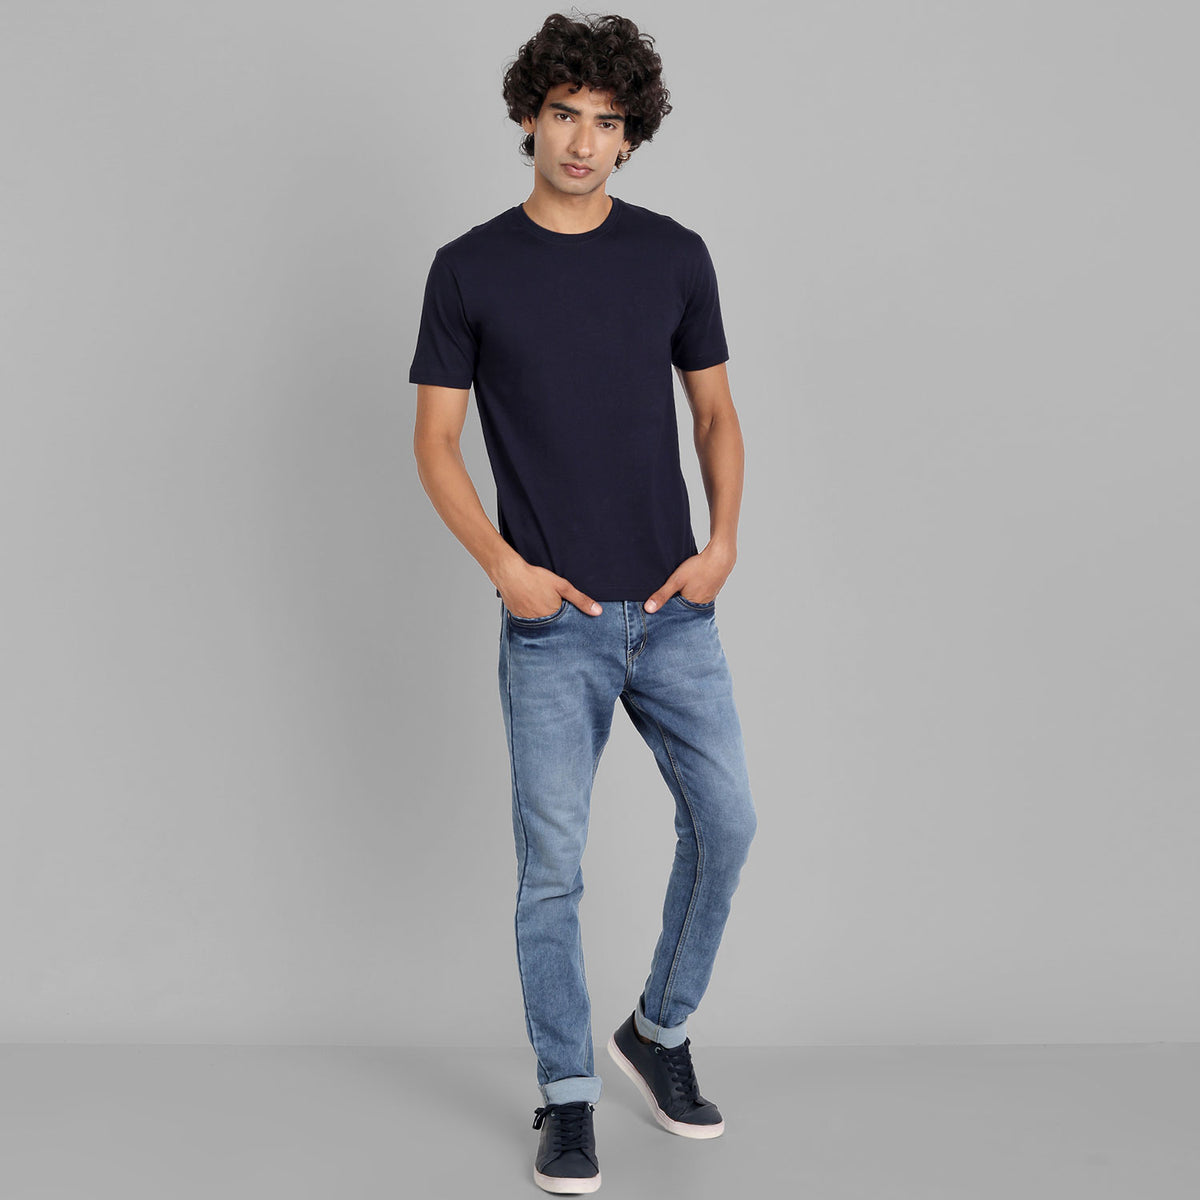 Plain T-shirt For men Combo Navy Blue and Red